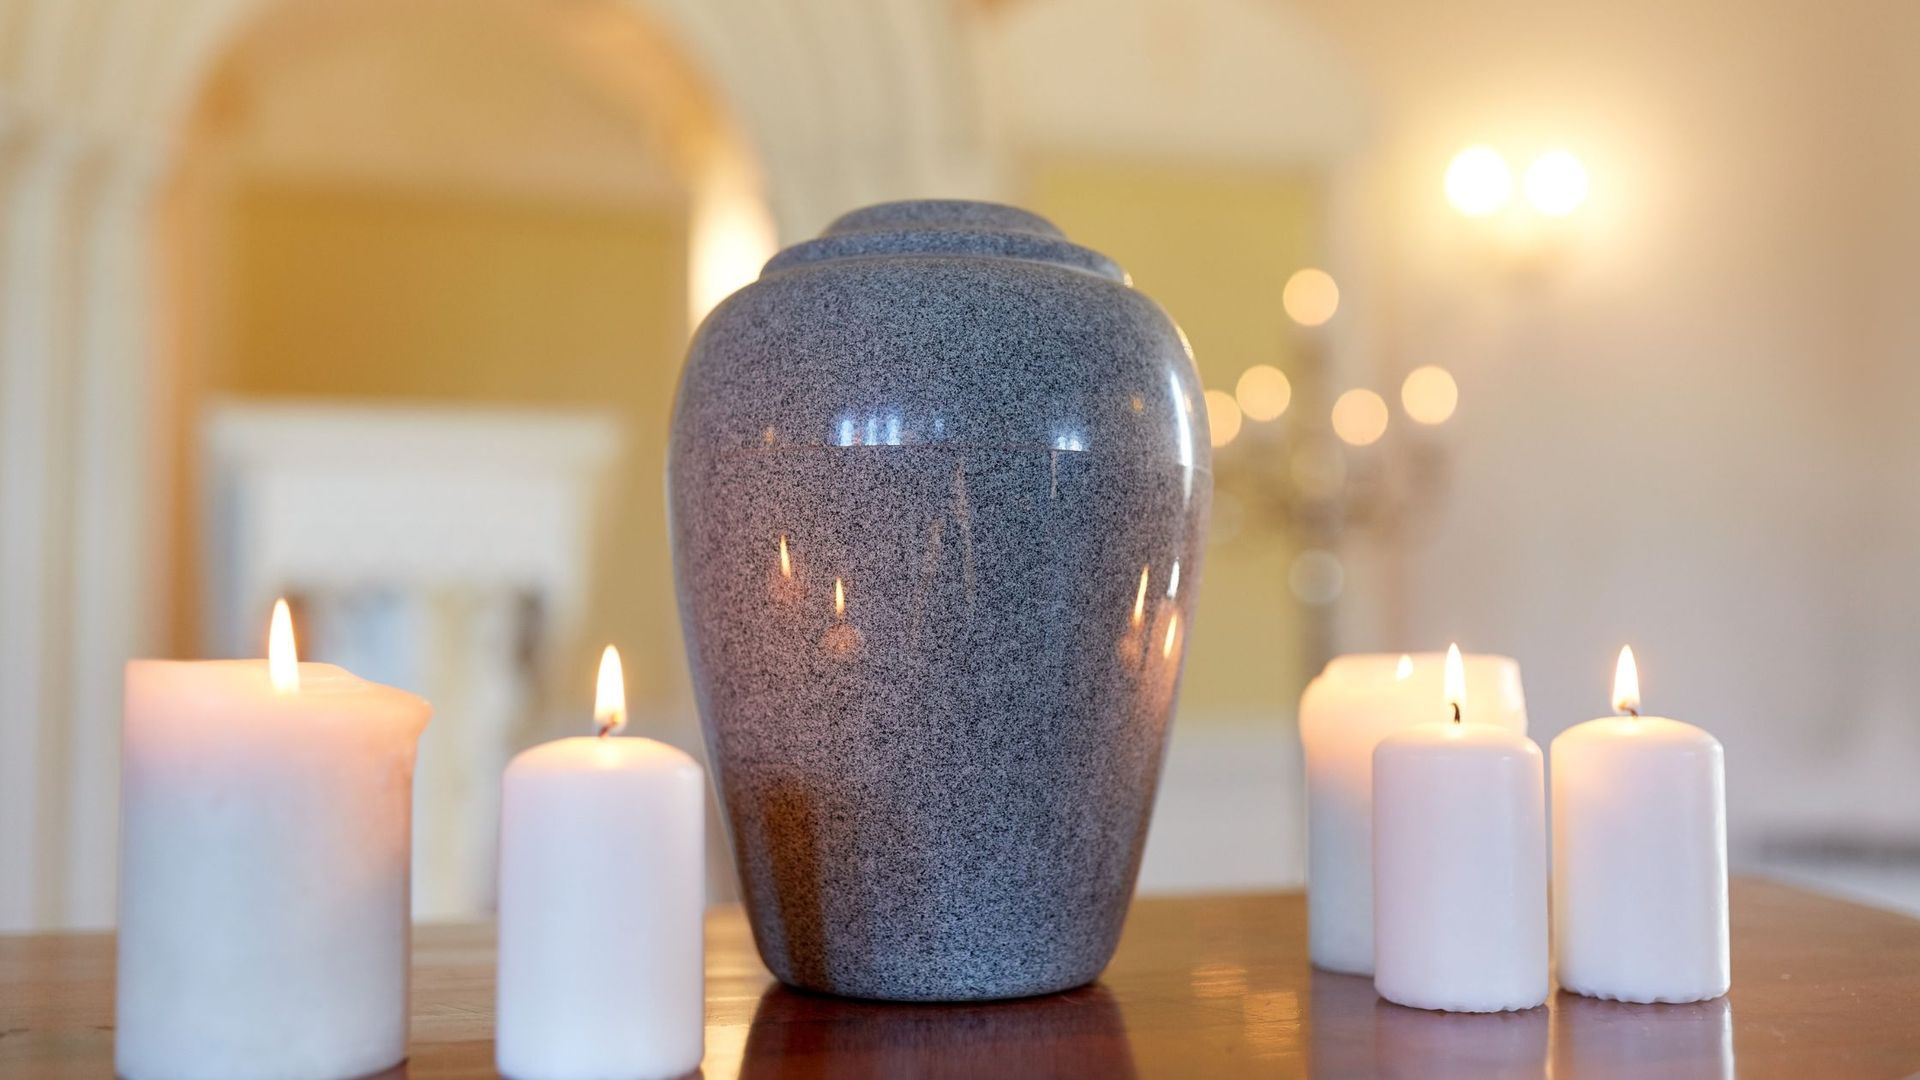 Cremation Urn on a table with lit candles around it